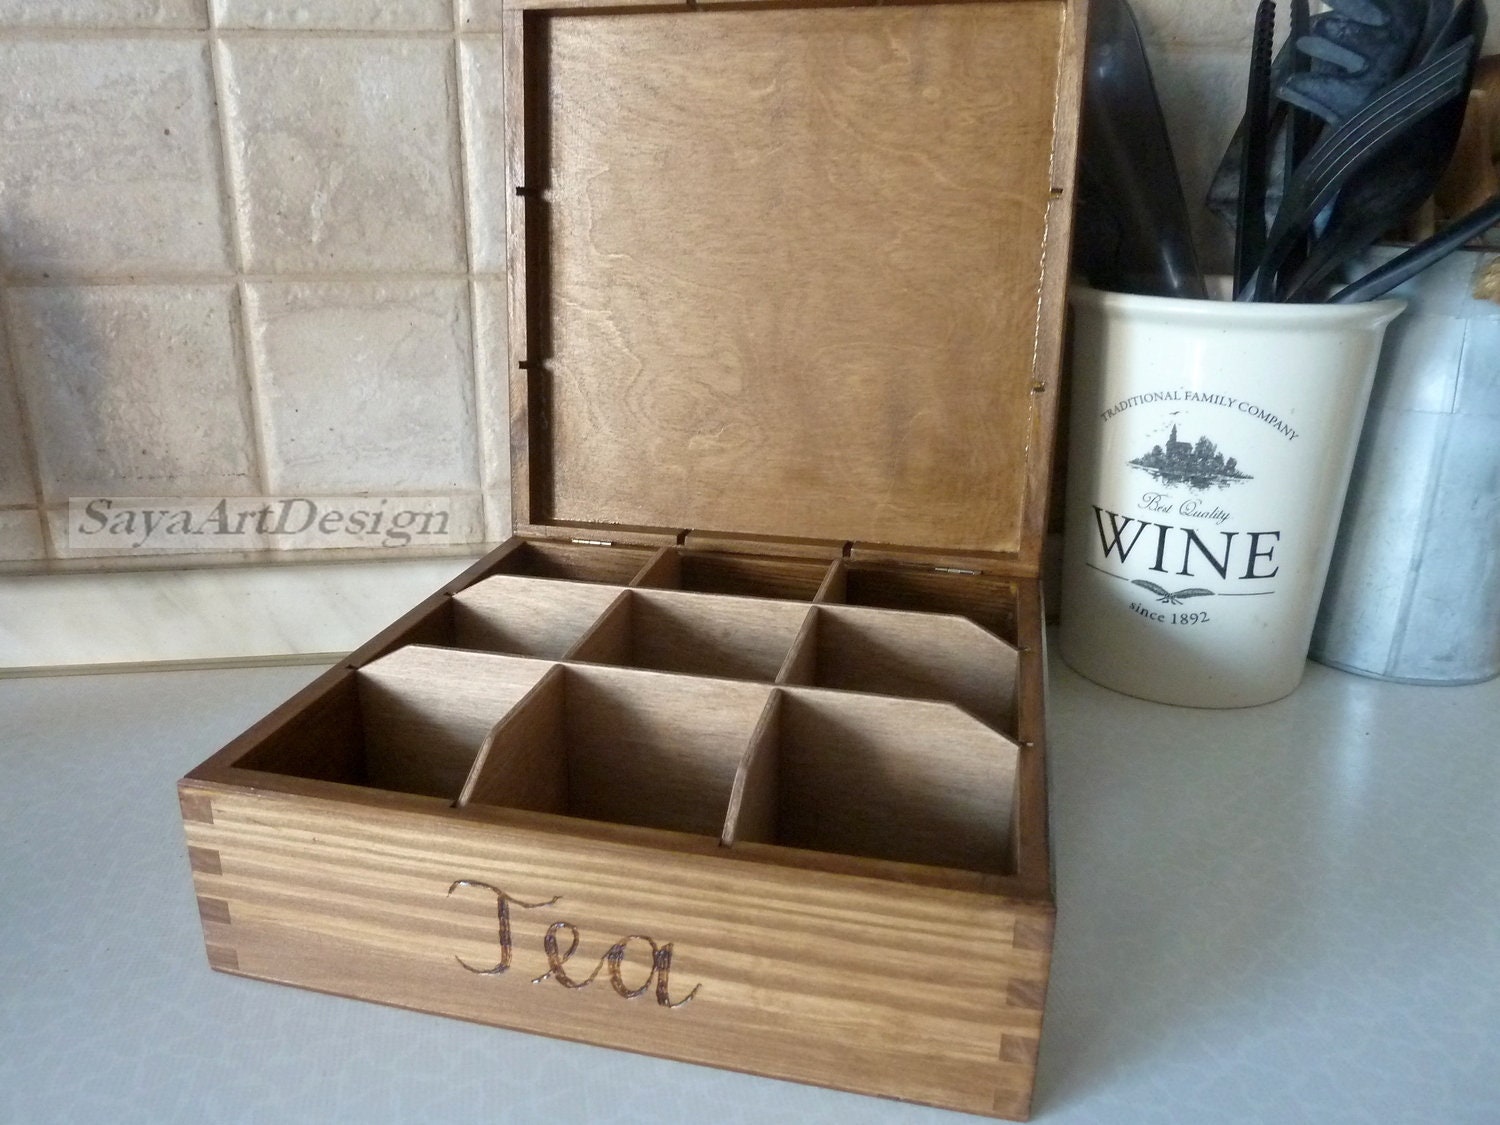 Personalized Wooden Tea Box with 8 compartments. Leaves and branches Decor.